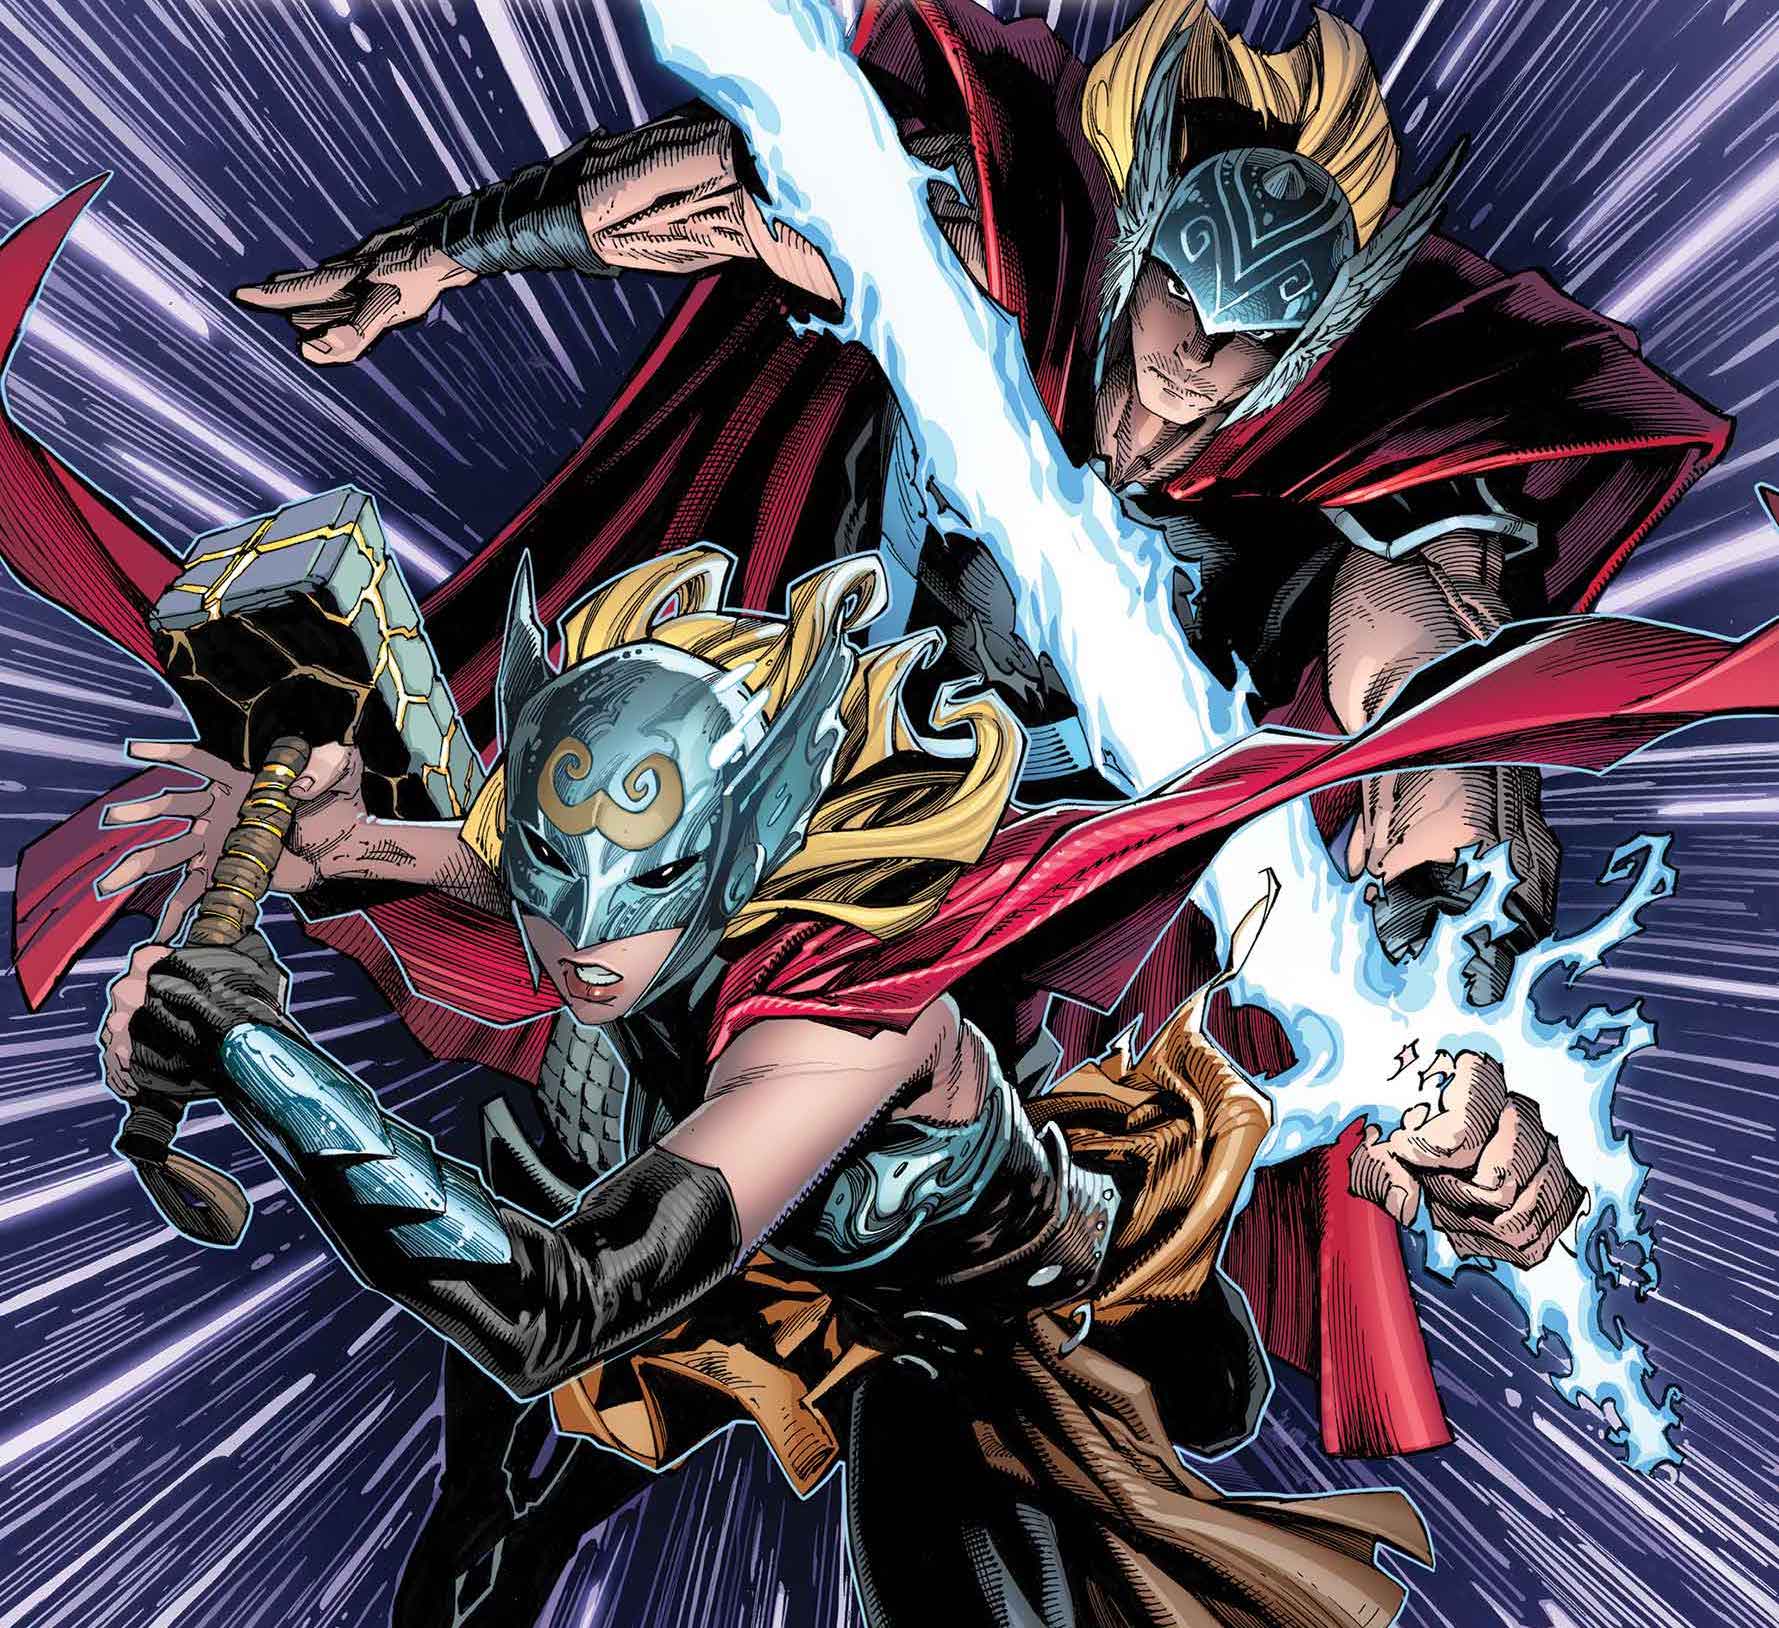 Marvel First Look: Jane Foster & The Mighty Thor #1